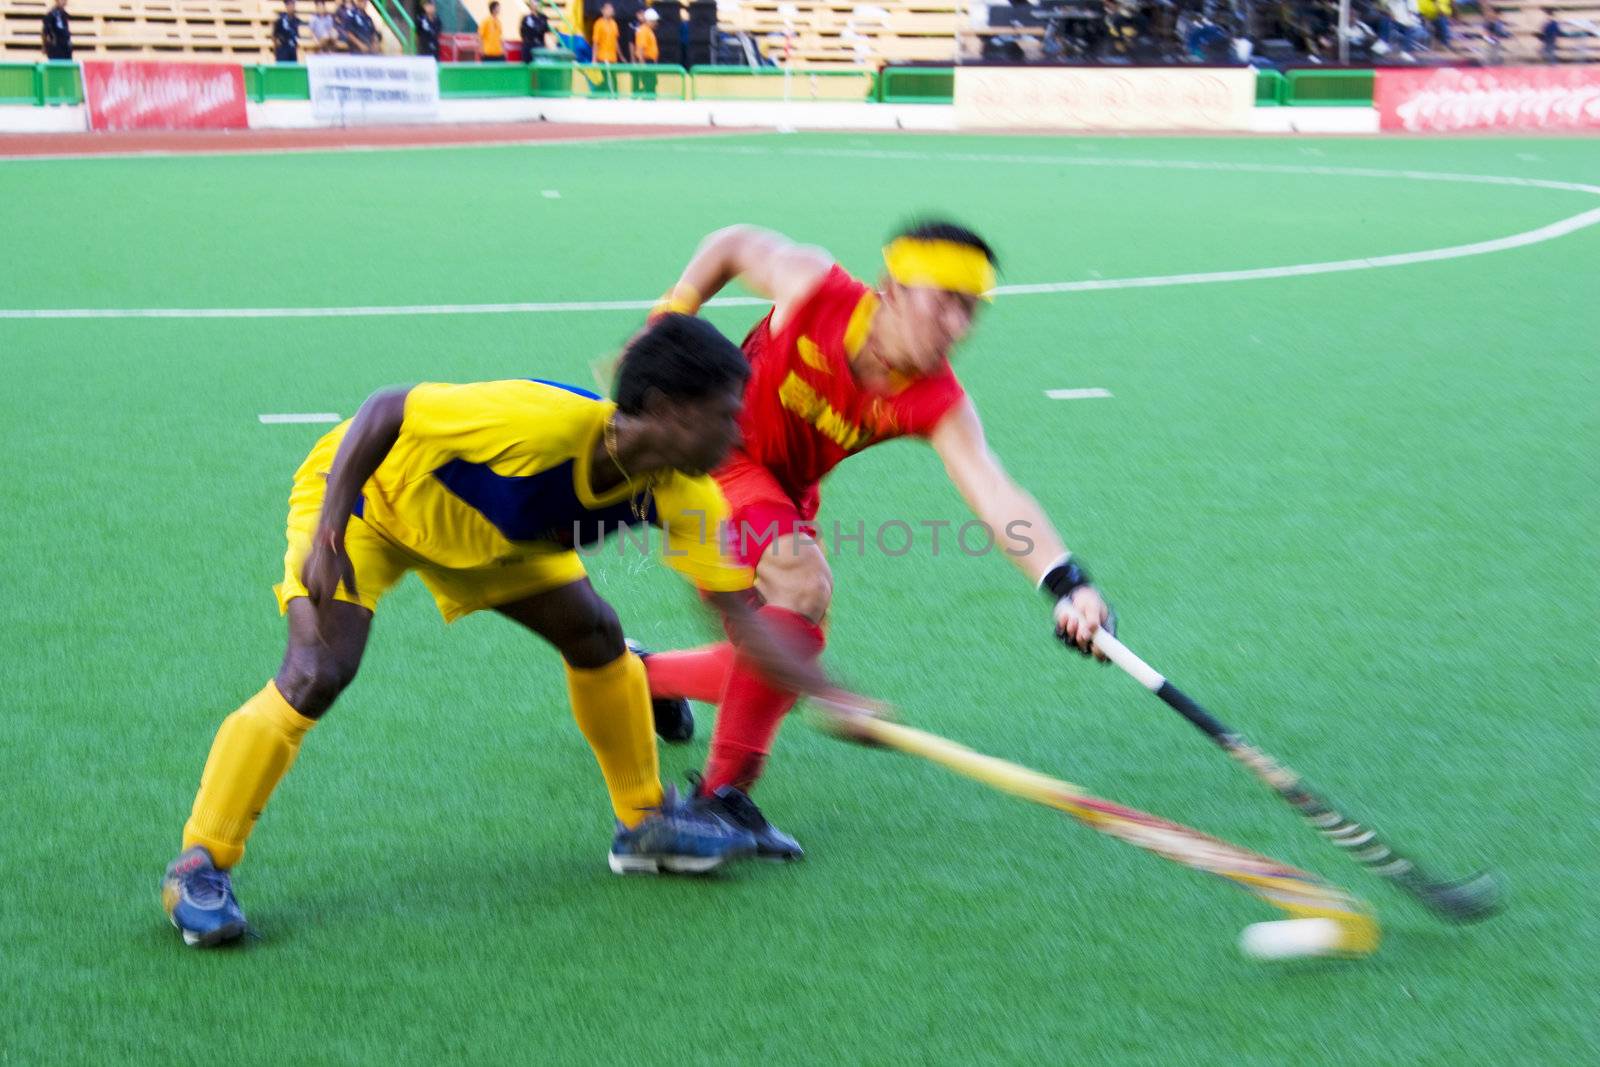 Field Hockey Action (Blurred) by shariffc